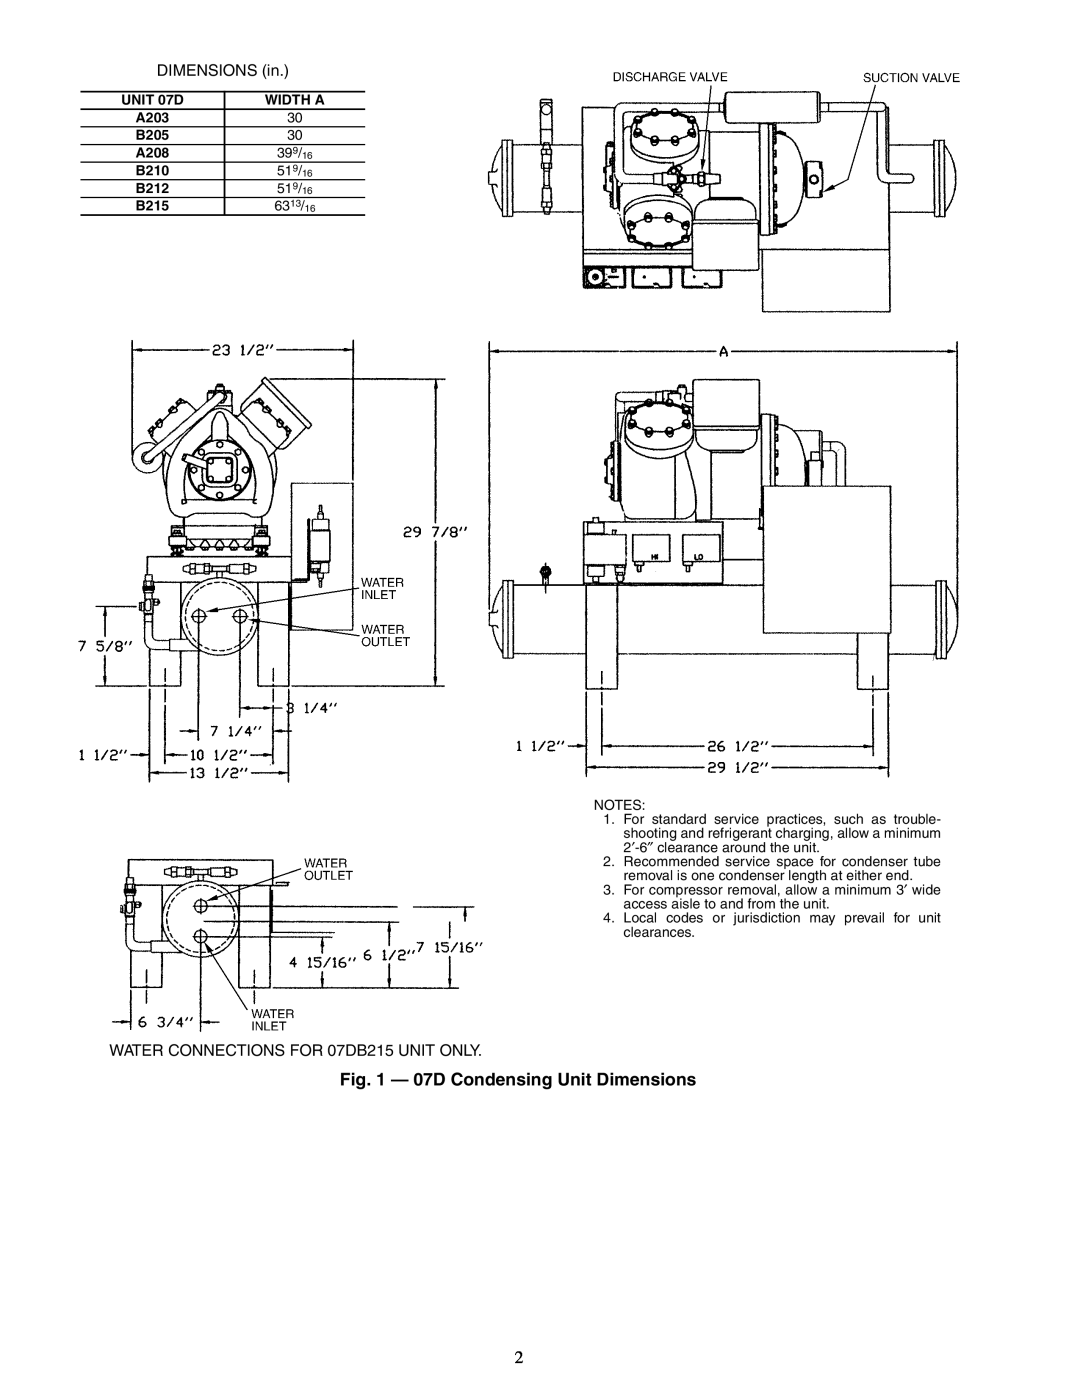 Carrier 06D specifications 07D Condensing Unit Dimensions, DIMENSIONS in, WATER CONNECTIONS FOR 07DB215 UNIT ONLY 